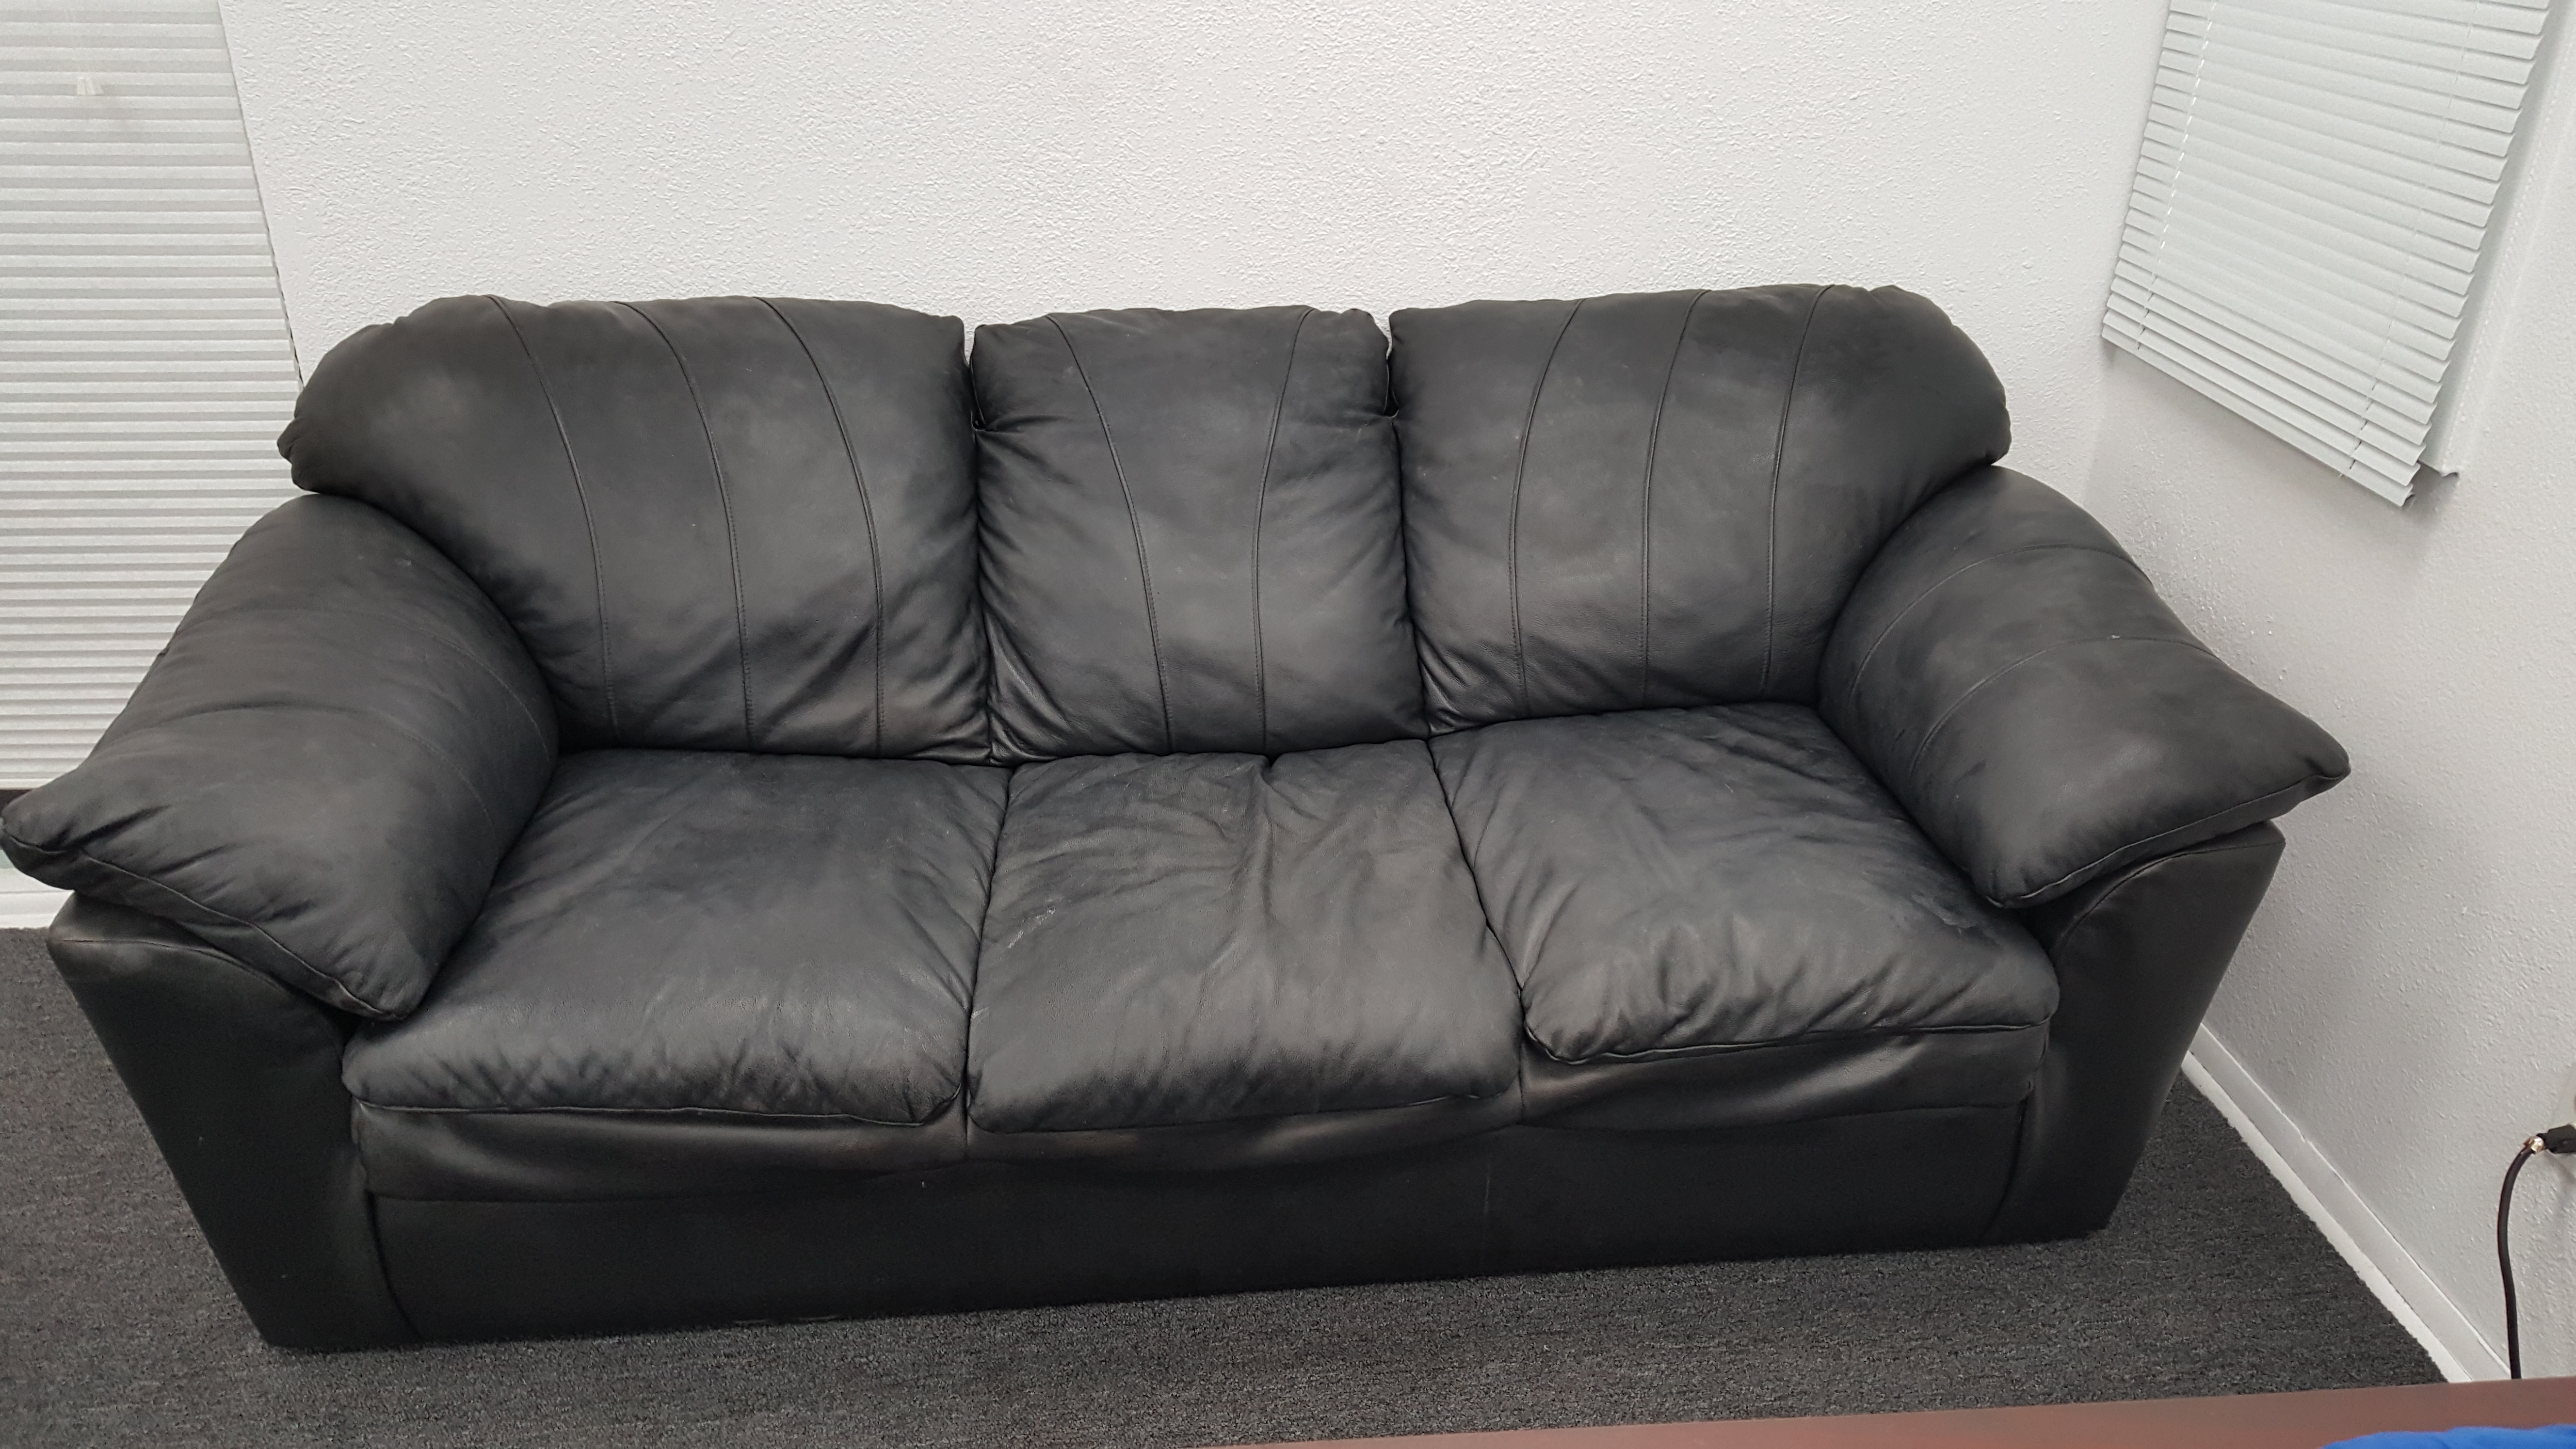 Black couch casting